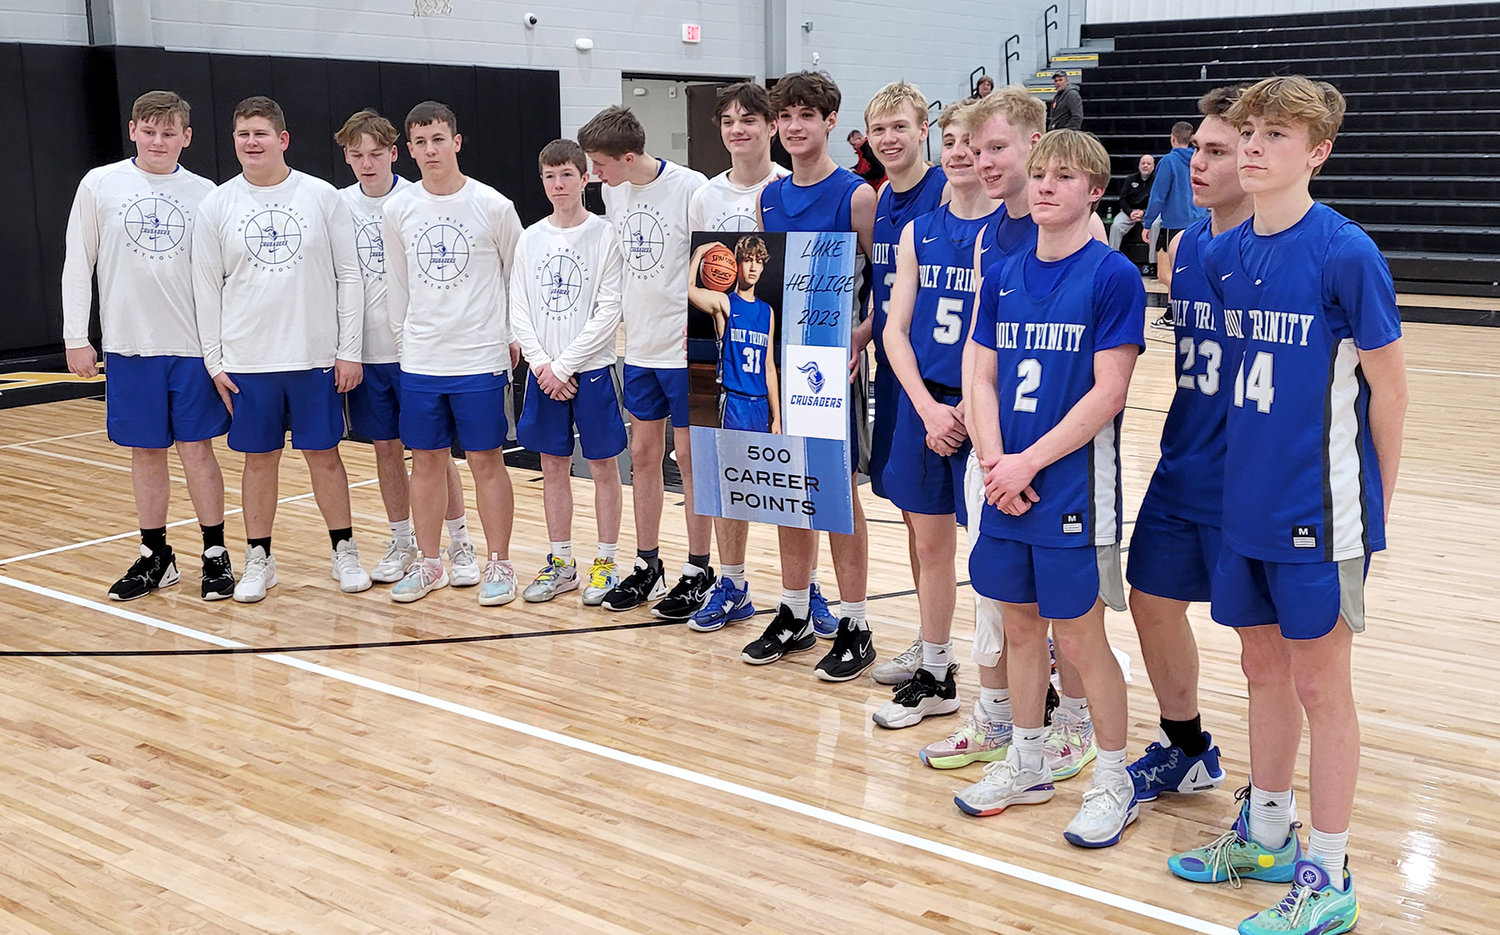 Luke Hellige, center, stands with a poster signifying his surpassing of the 500-point mark Tuesday night in the Crusaders' win over Central Lee.